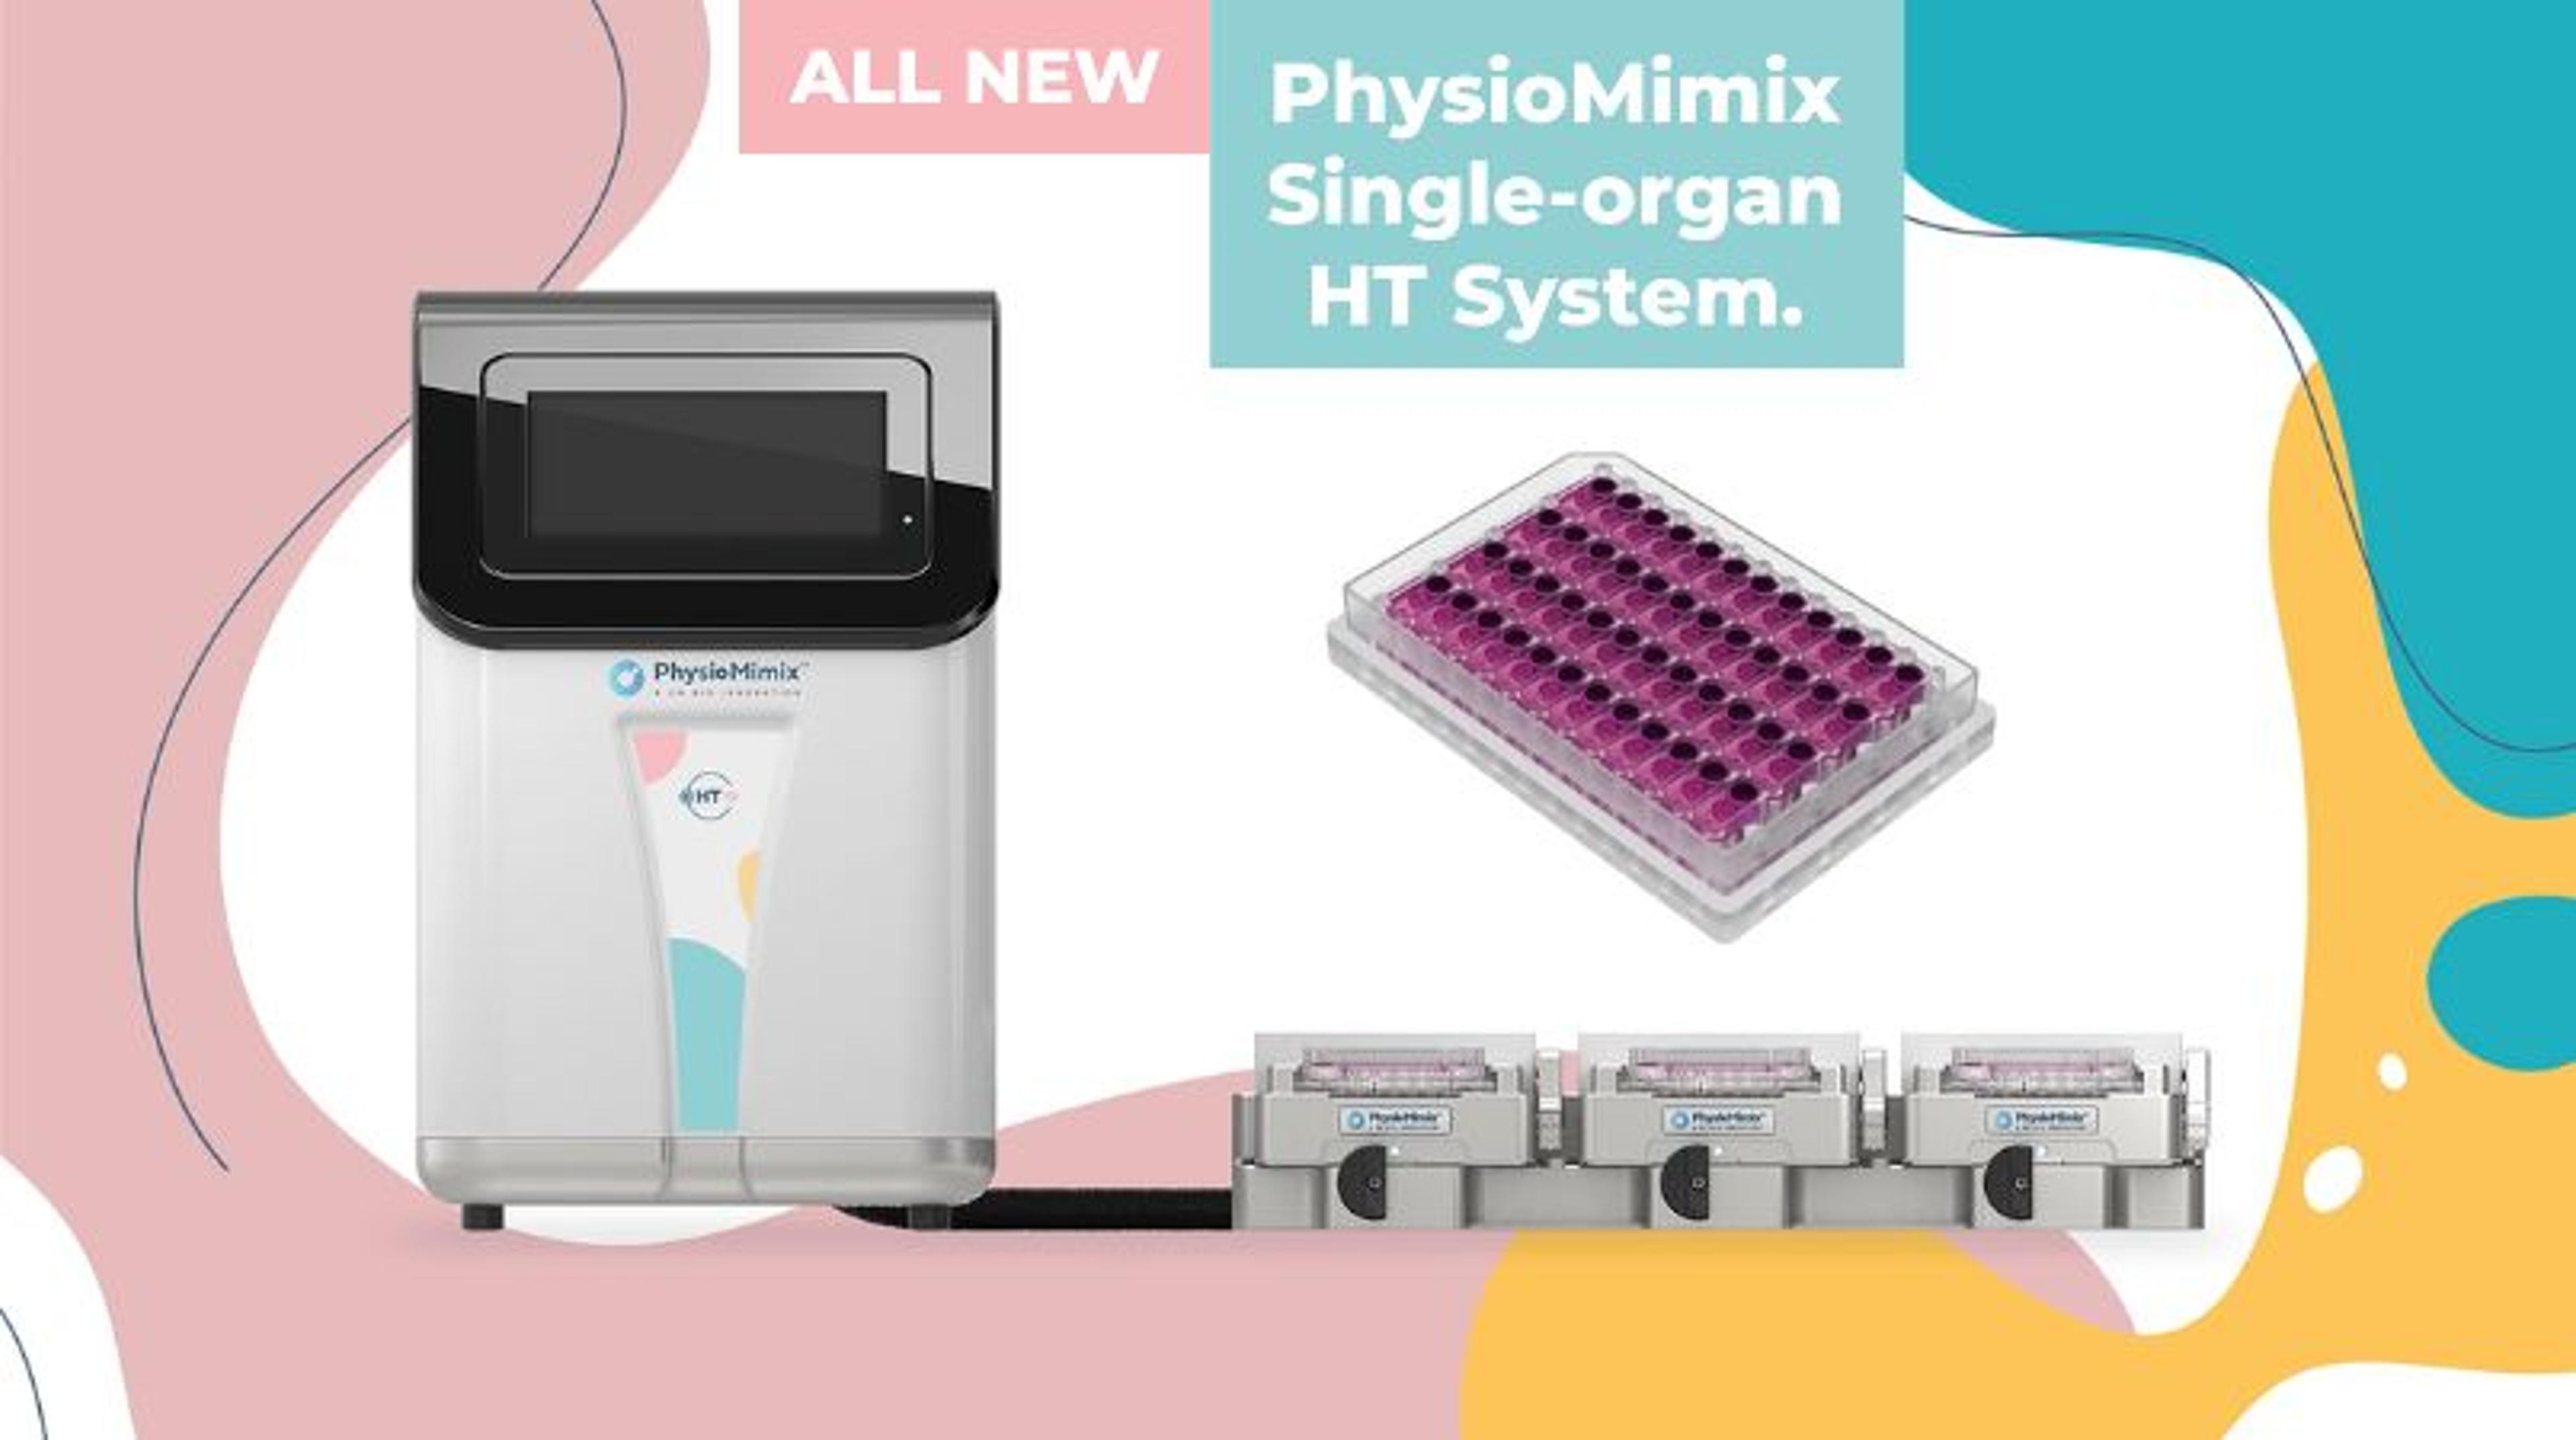 Introducing the PhysioMimix single-organ HT system